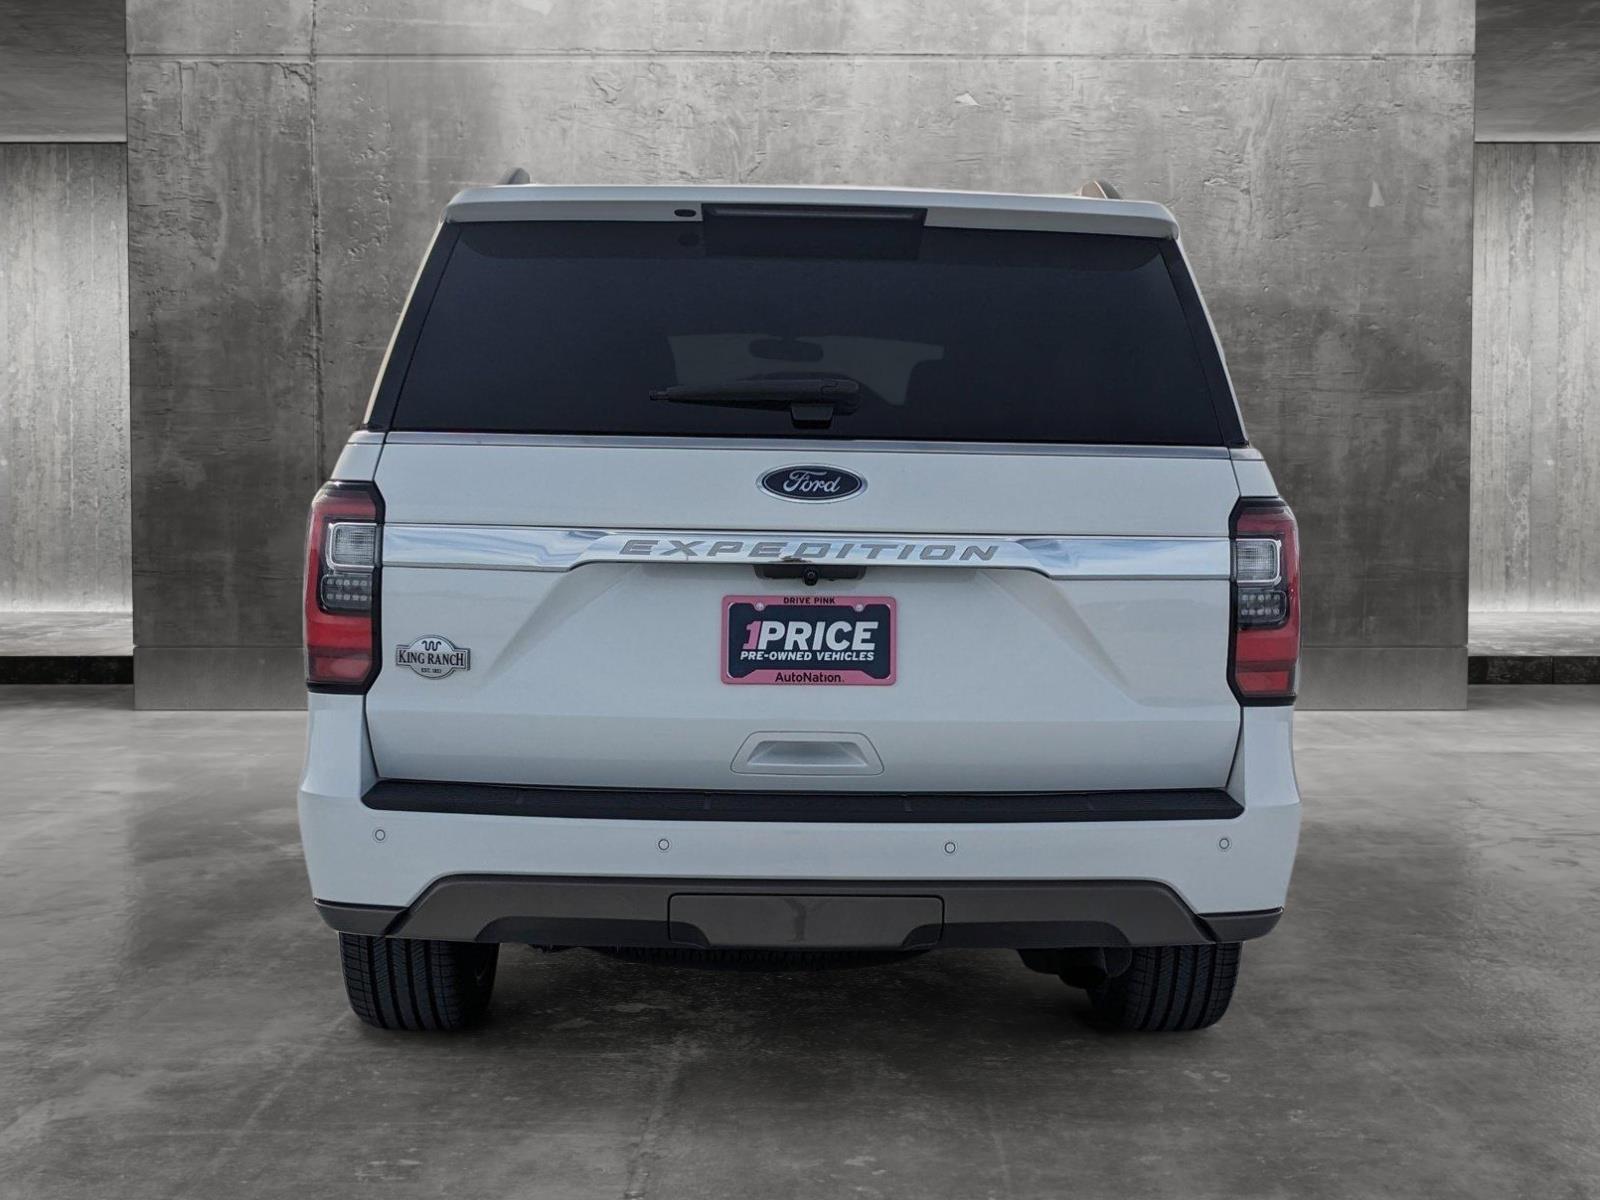 Ford Expedition #6 Hero Image